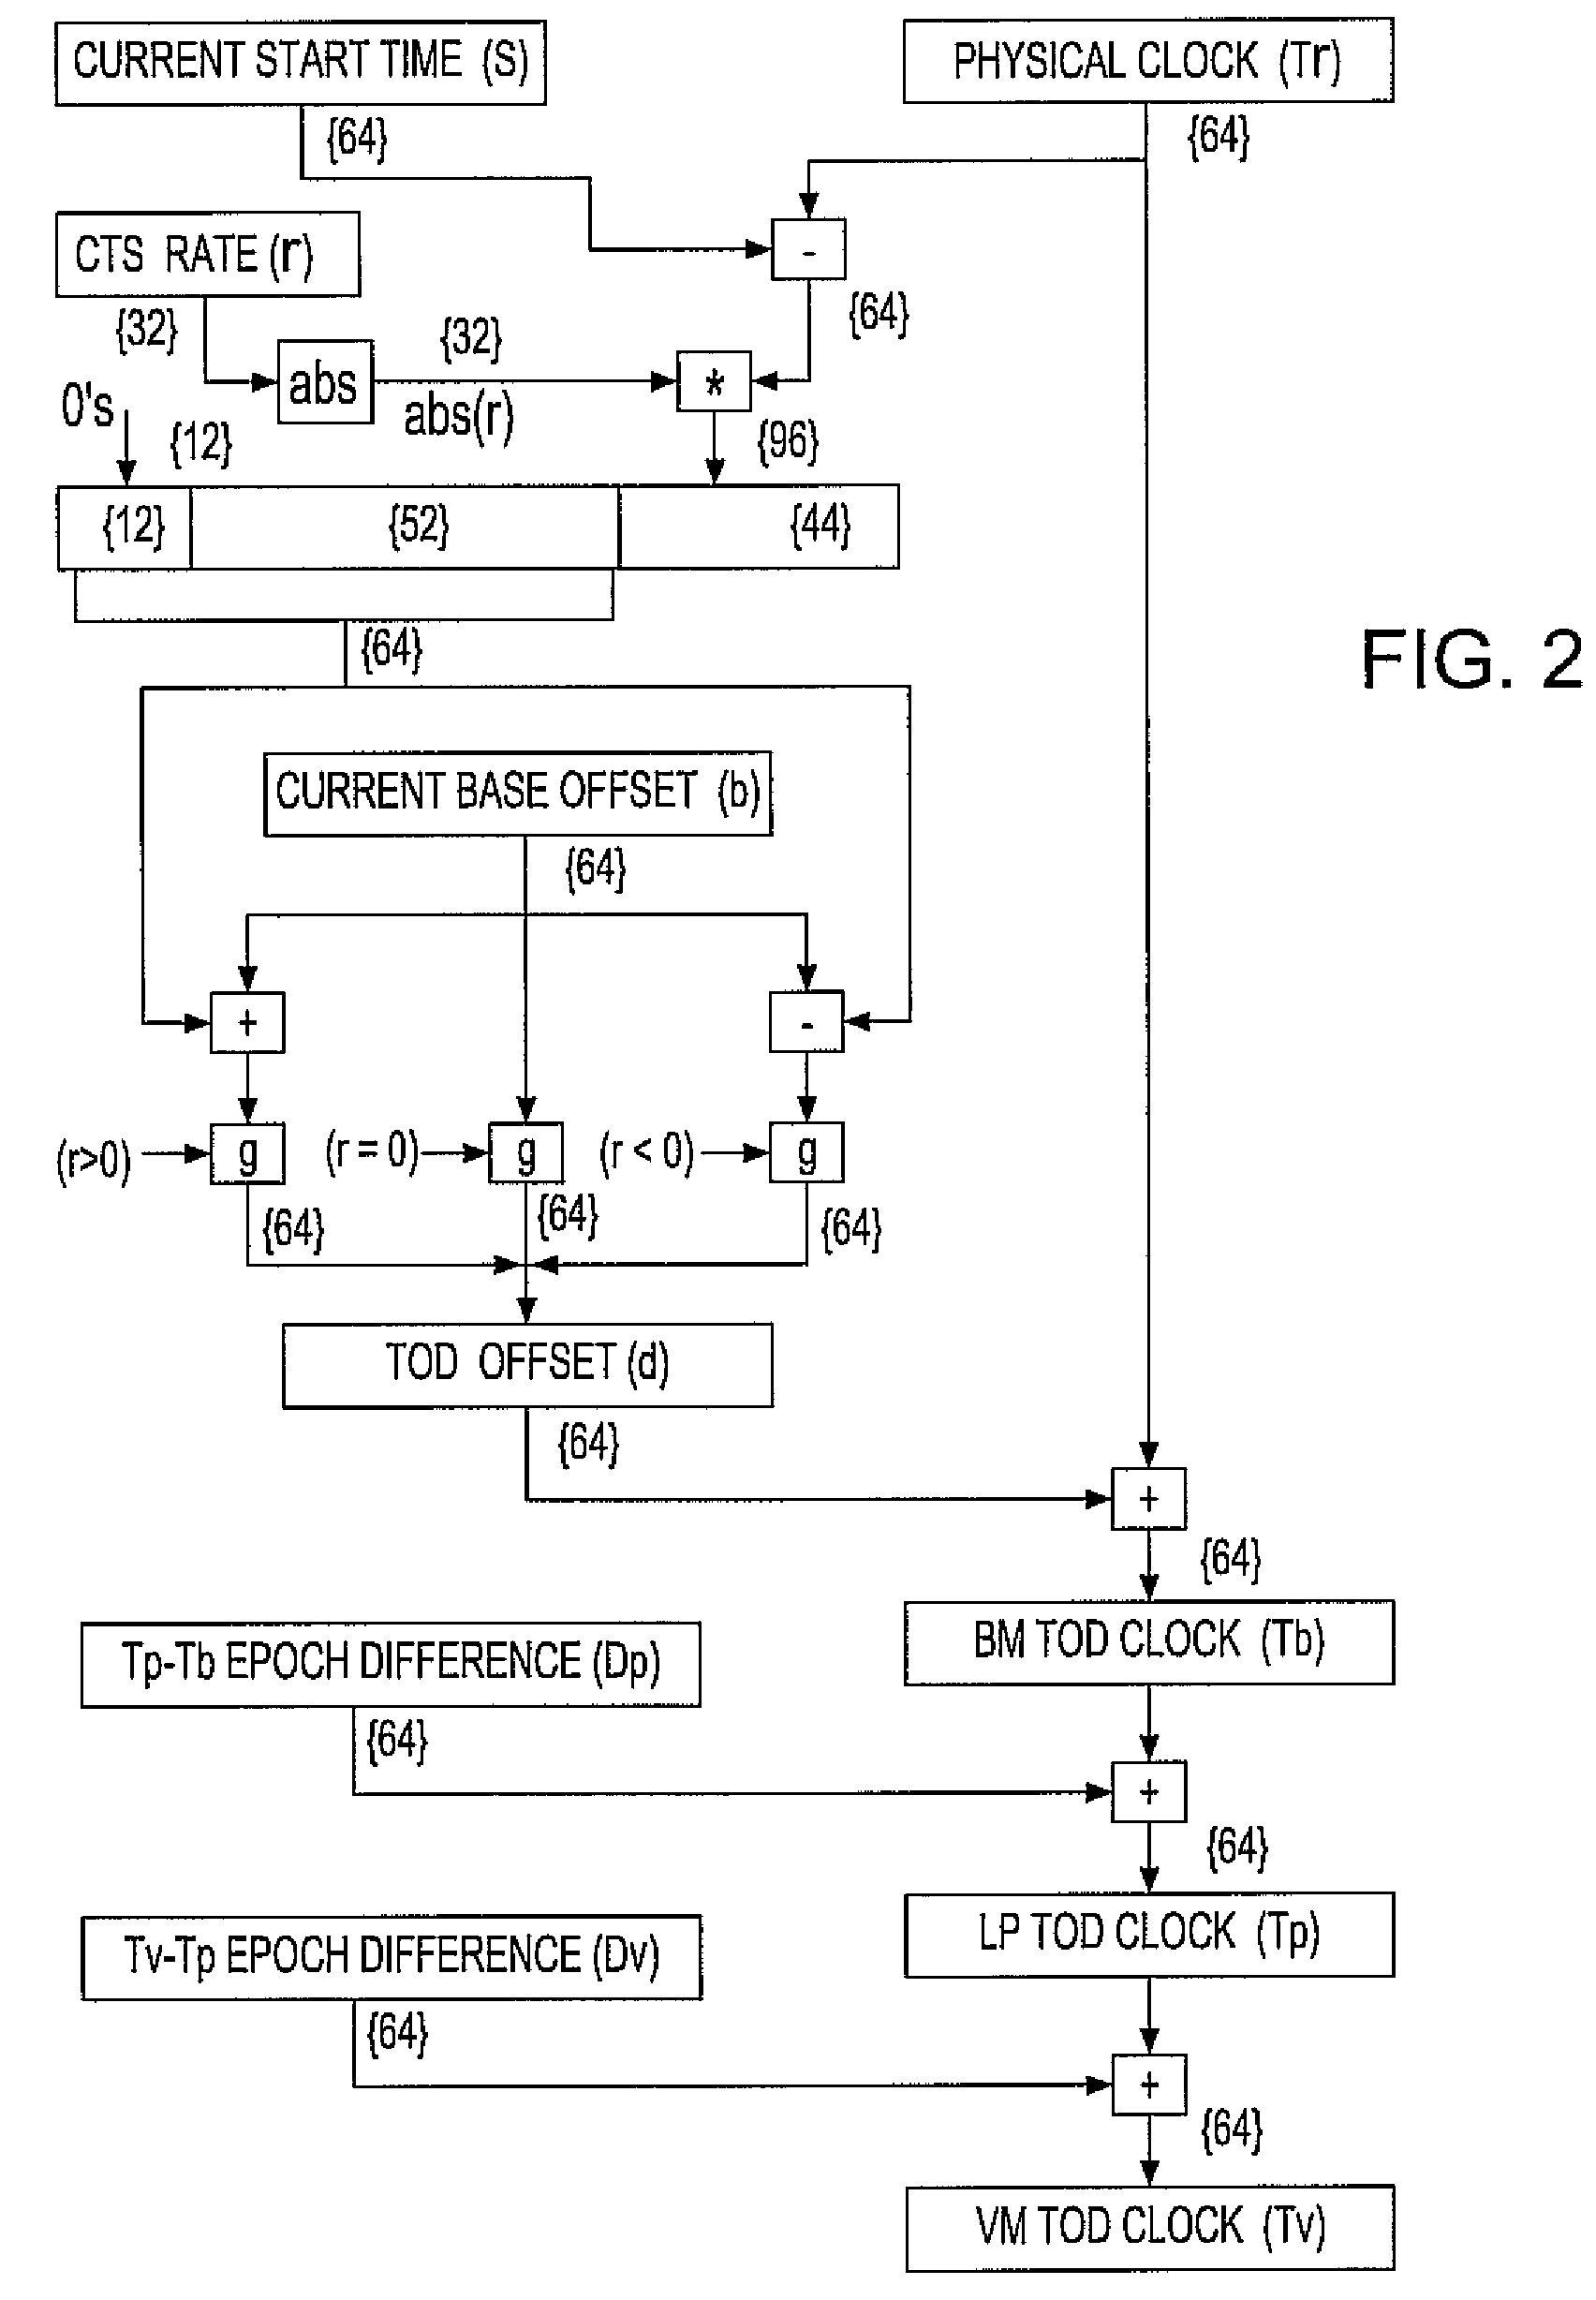 Simultaneously updating logical time of day (TOD) clocks for multiple cpus in response to detecting a carry at a pre-determined bit position of a physical clock